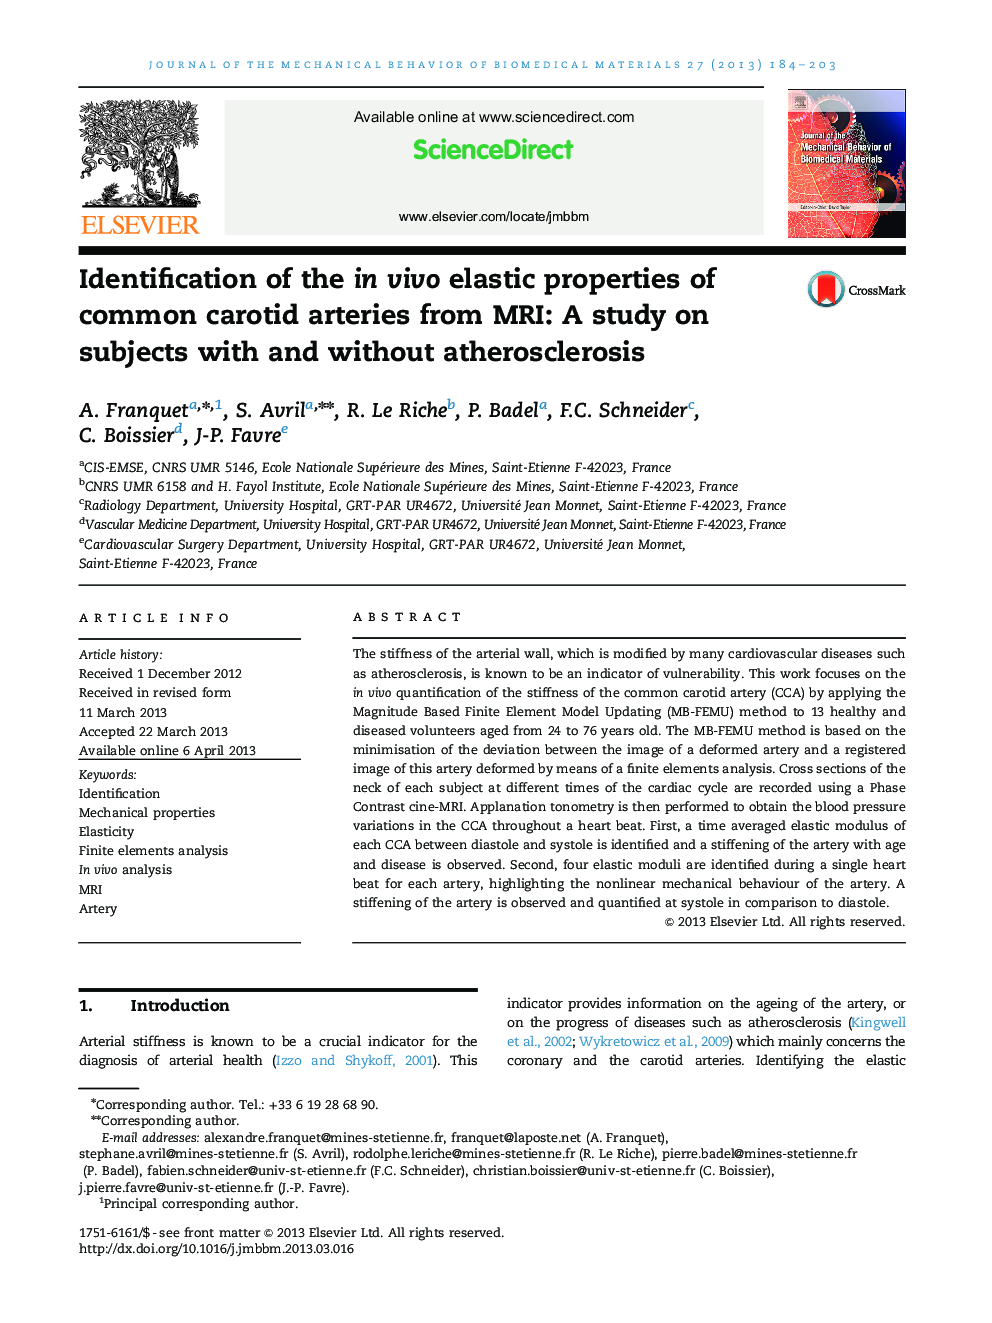 Identification of the in vivo elastic properties of common carotid arteries from MRI: A study on subjects with and without atherosclerosis